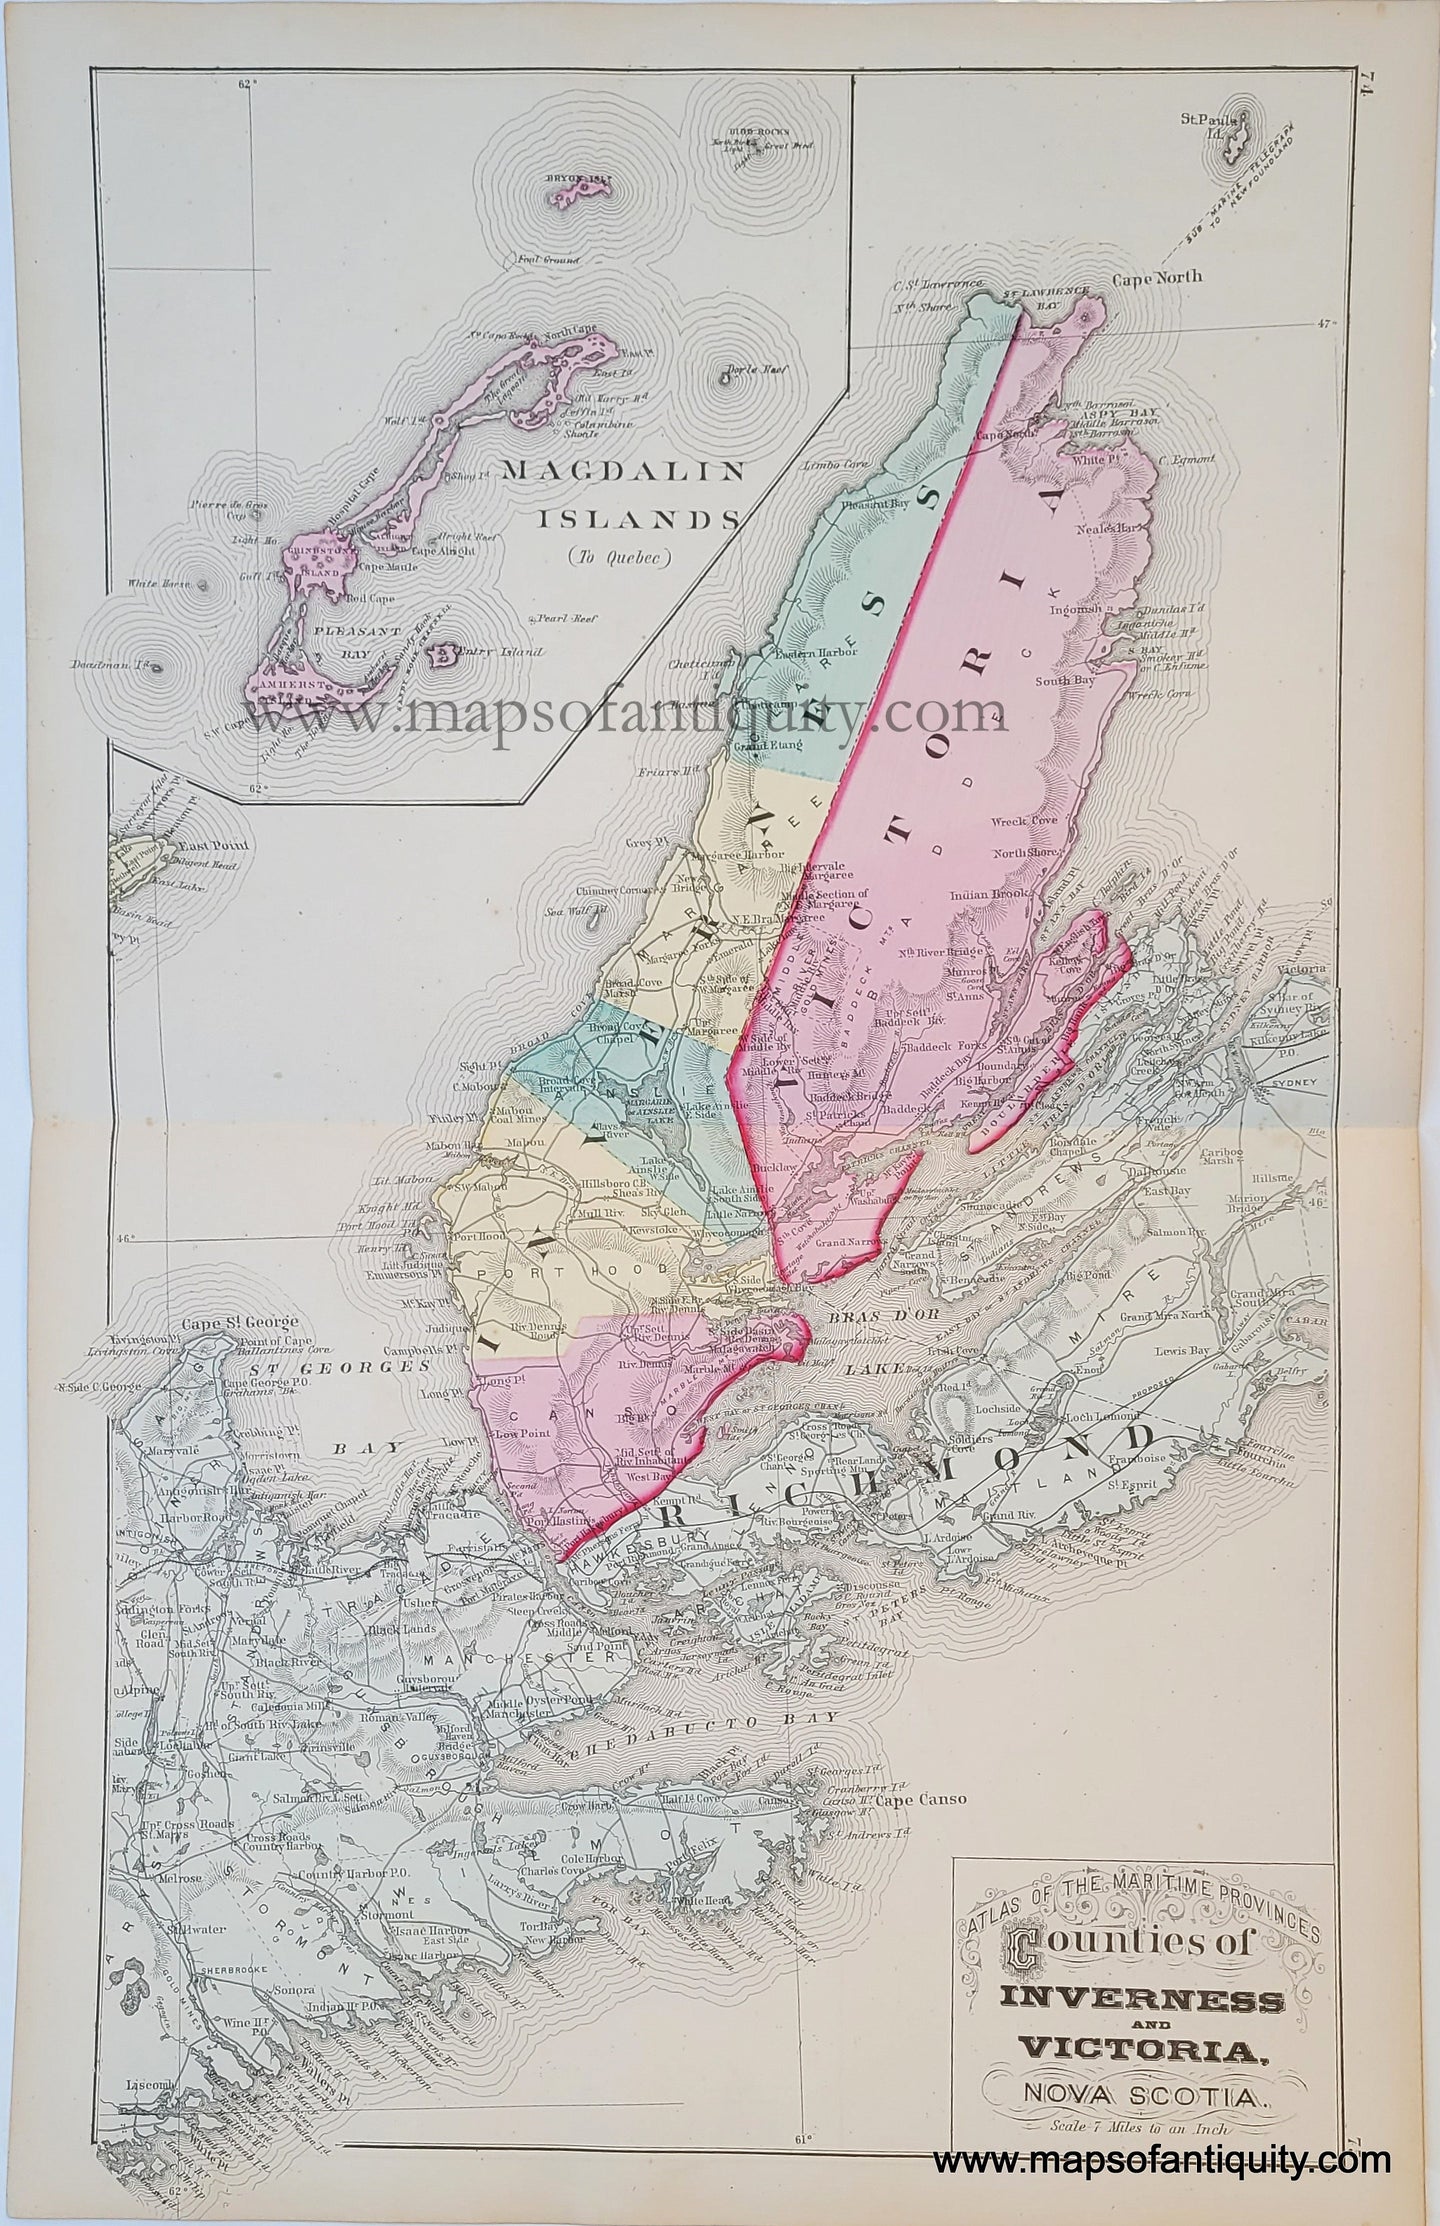 Antique-Hand-Colored-Map-Counties-of-Inverness-and-Victoria-Nova-Scotia-North-America-Canada-1879-Roe-Maps-Of-Antiquity